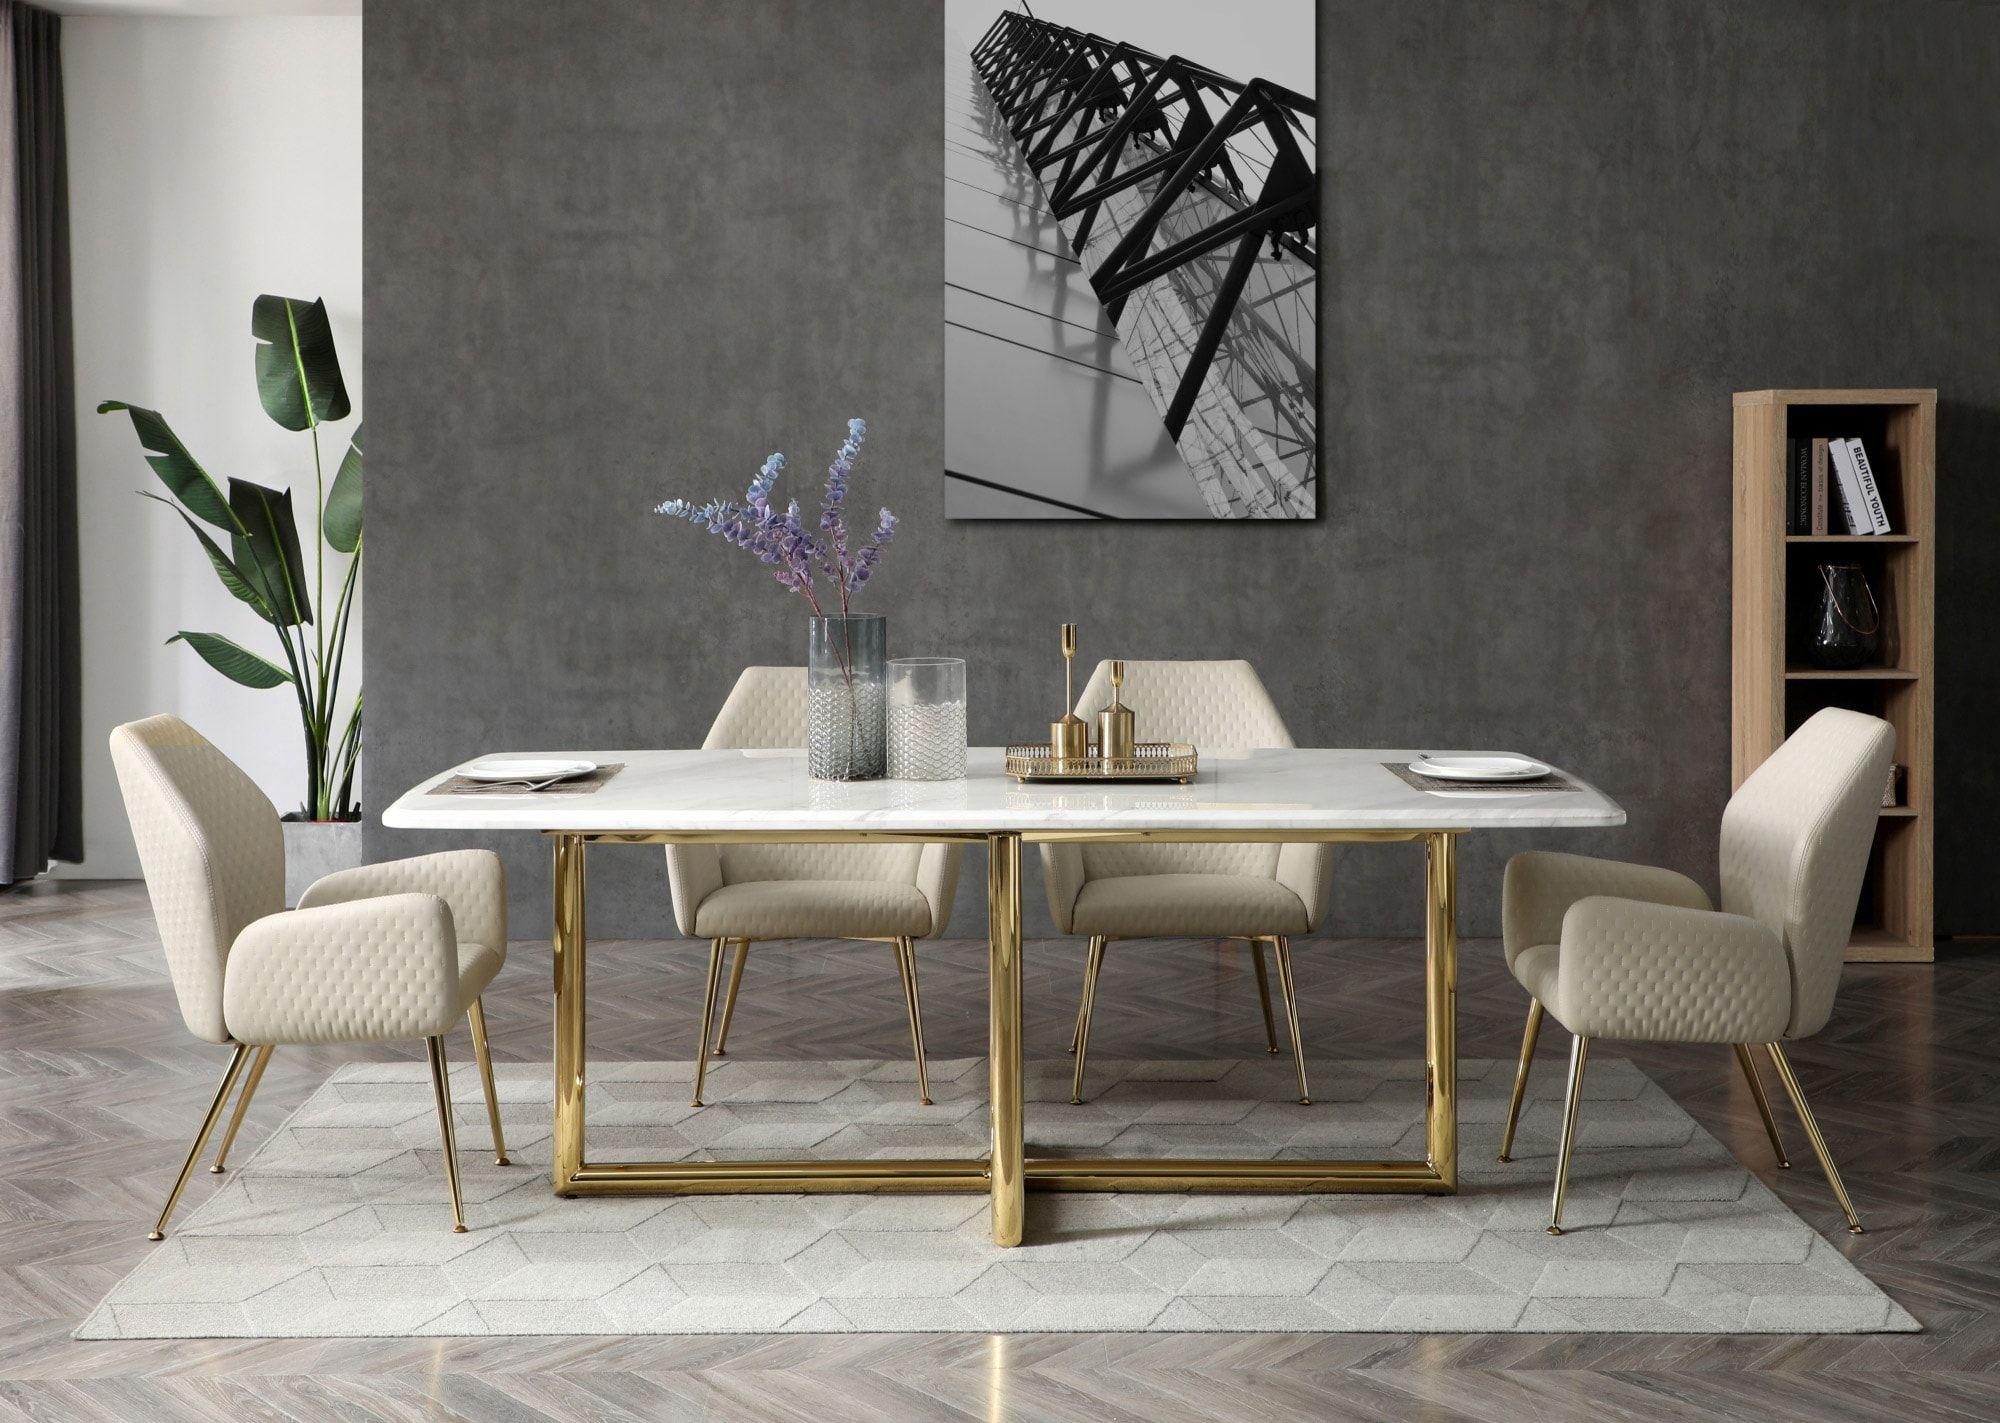 Contemporary, Modern Dining Room Set Empress VGVCT1908-5pcs in White, Gold Fabric